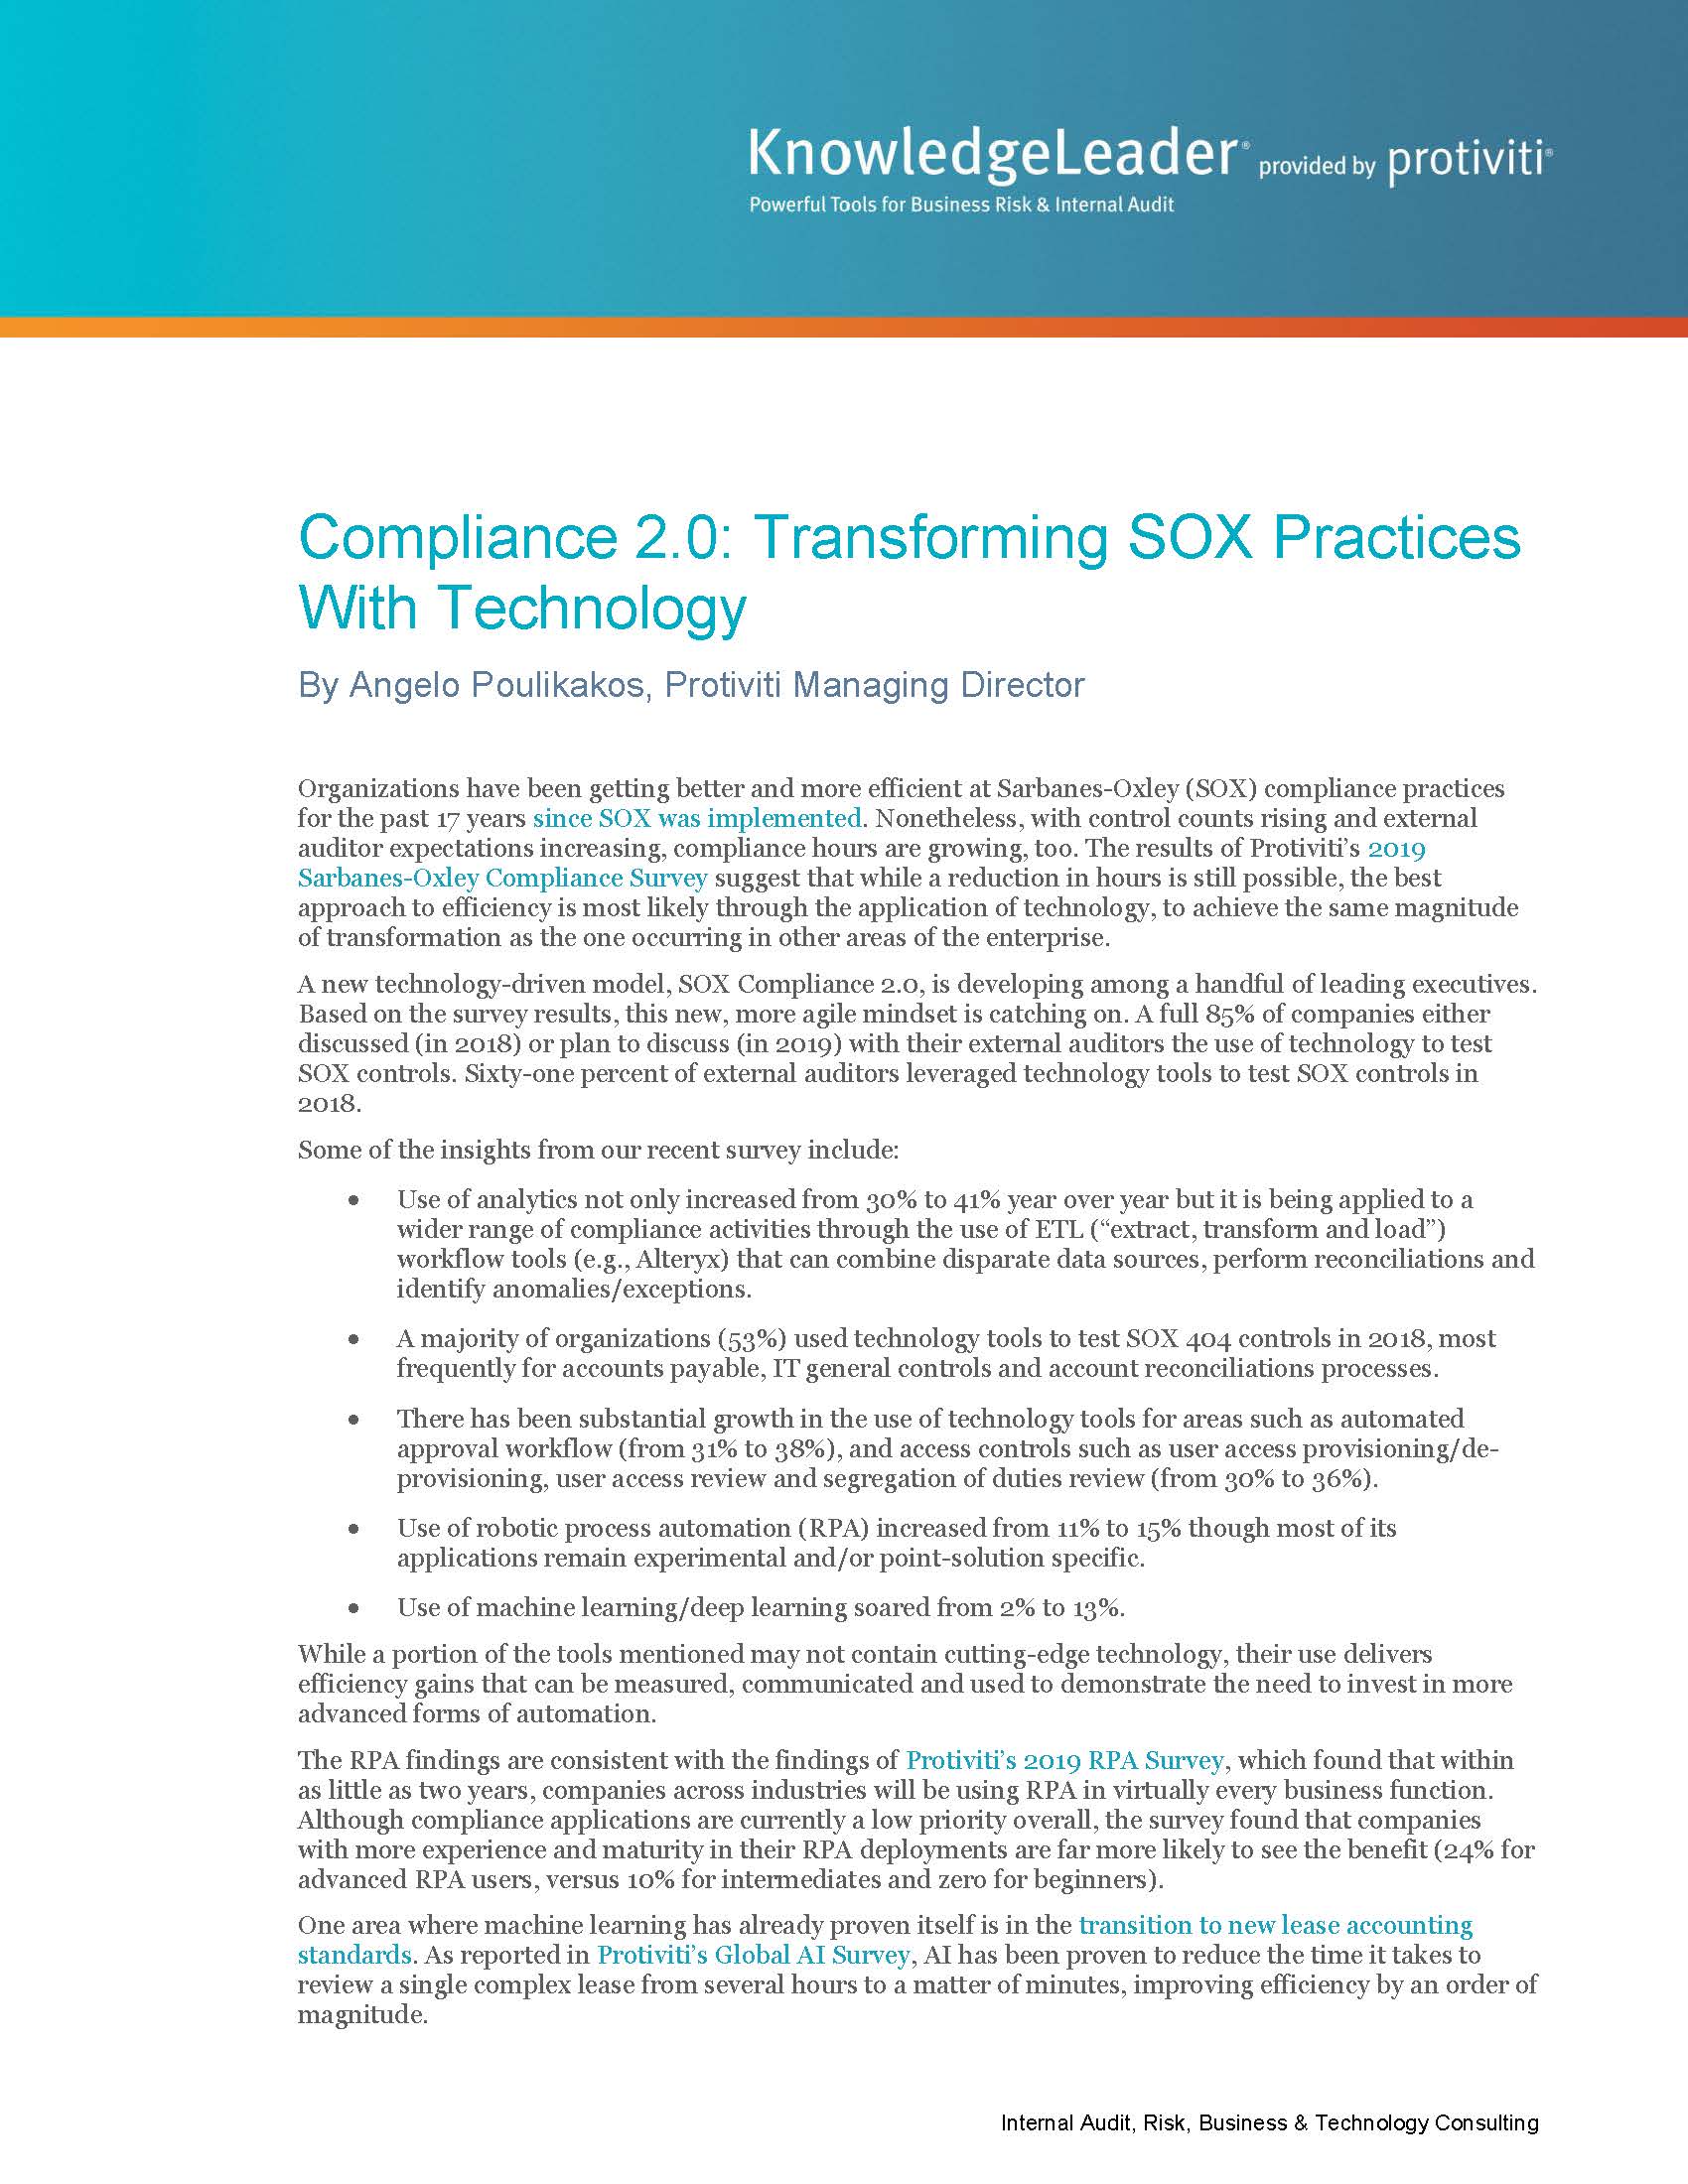 Screenshot of the first page of Compliance 2.0: Transforming SOX Practices With Technology